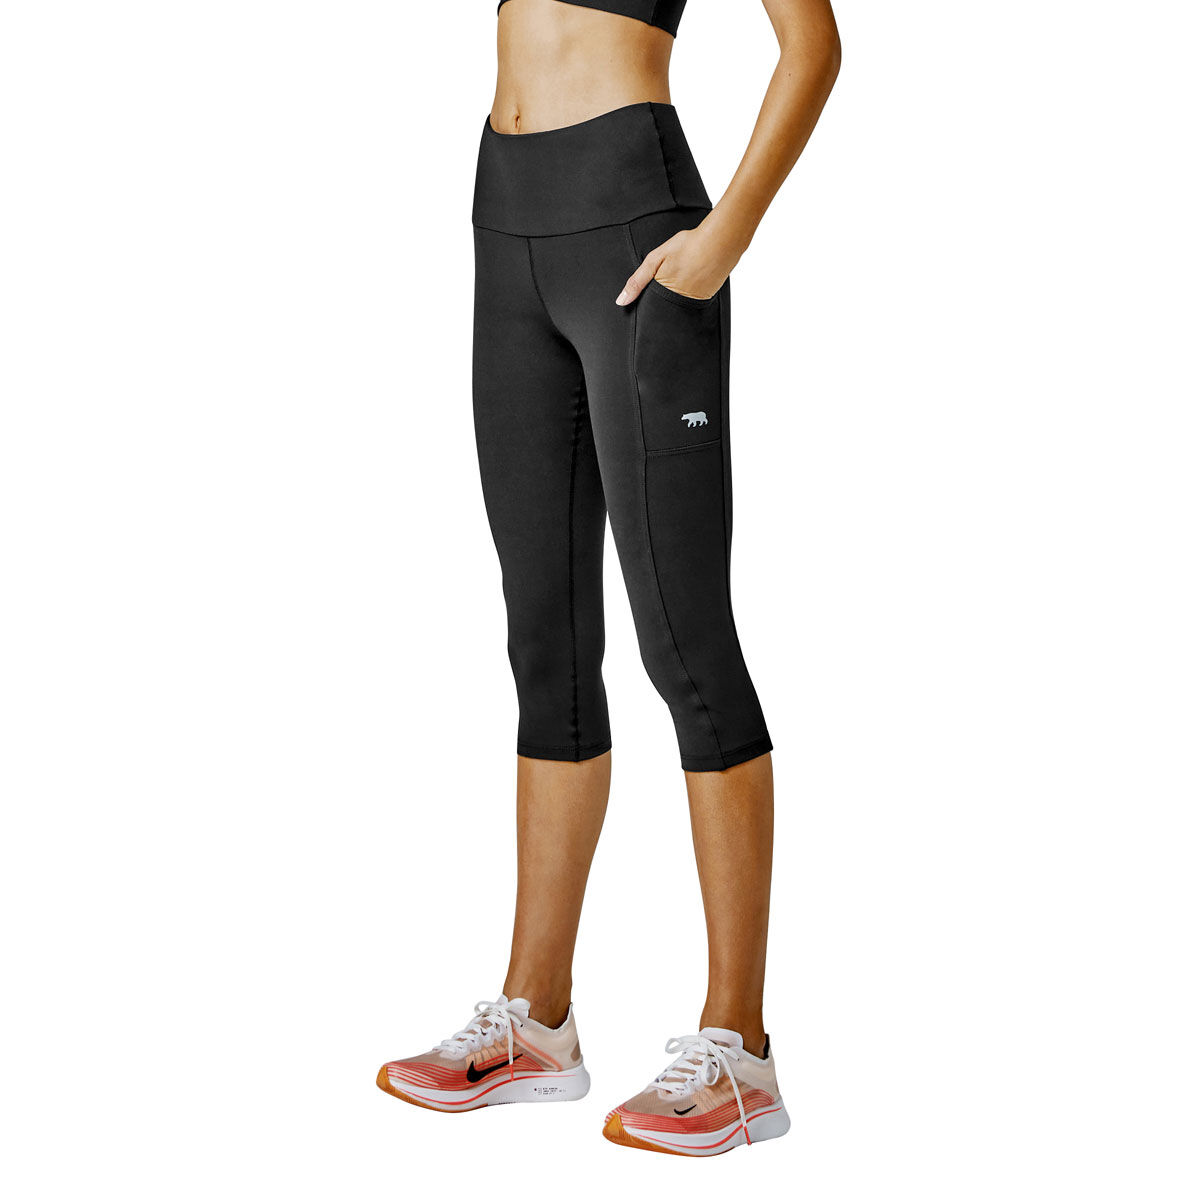 Running Bare 3/4 Tights. Womens Activewear.